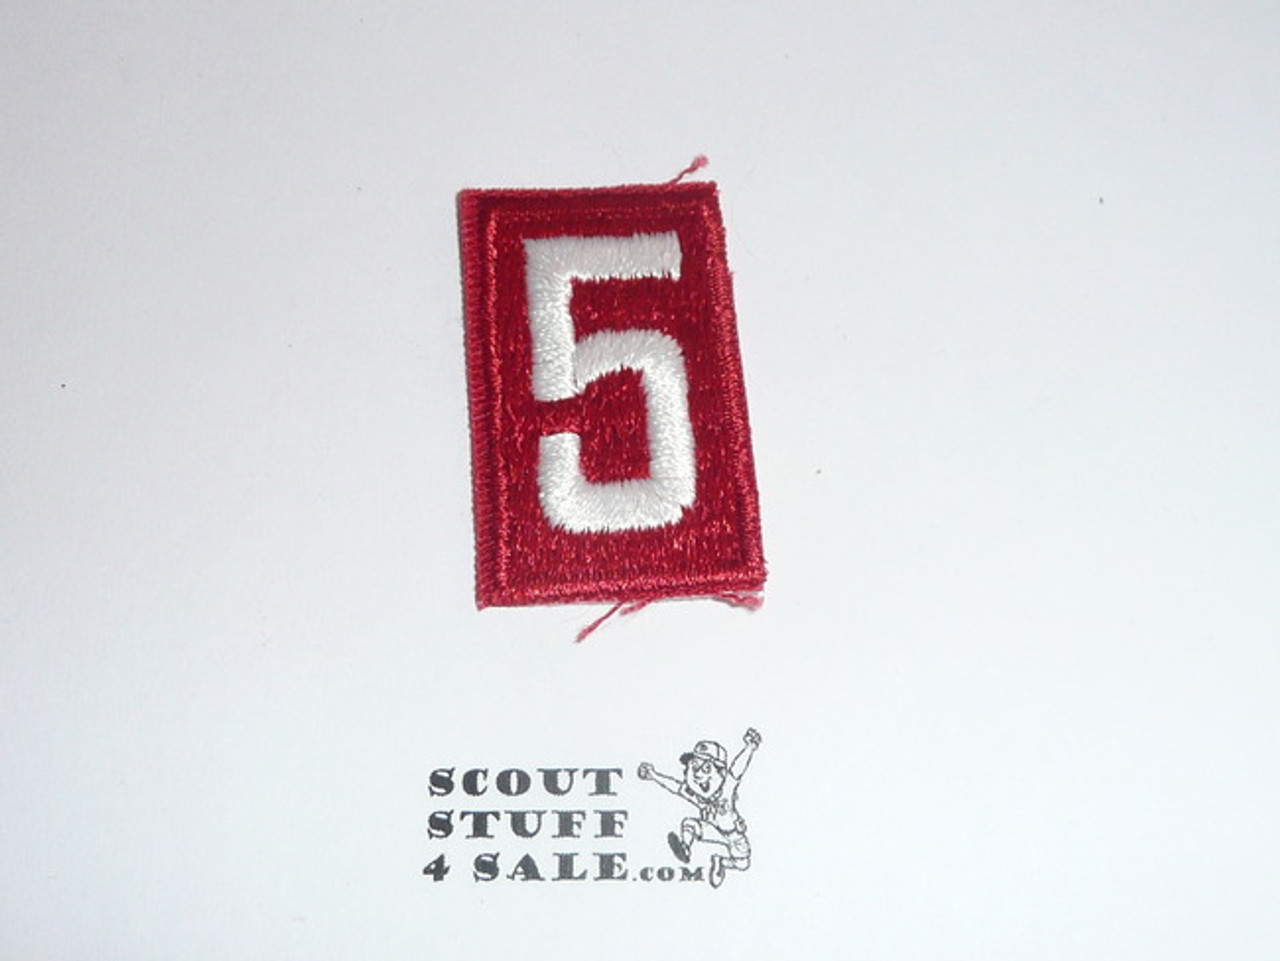 Old Red Troop Numeral "5", fully embroidered, used